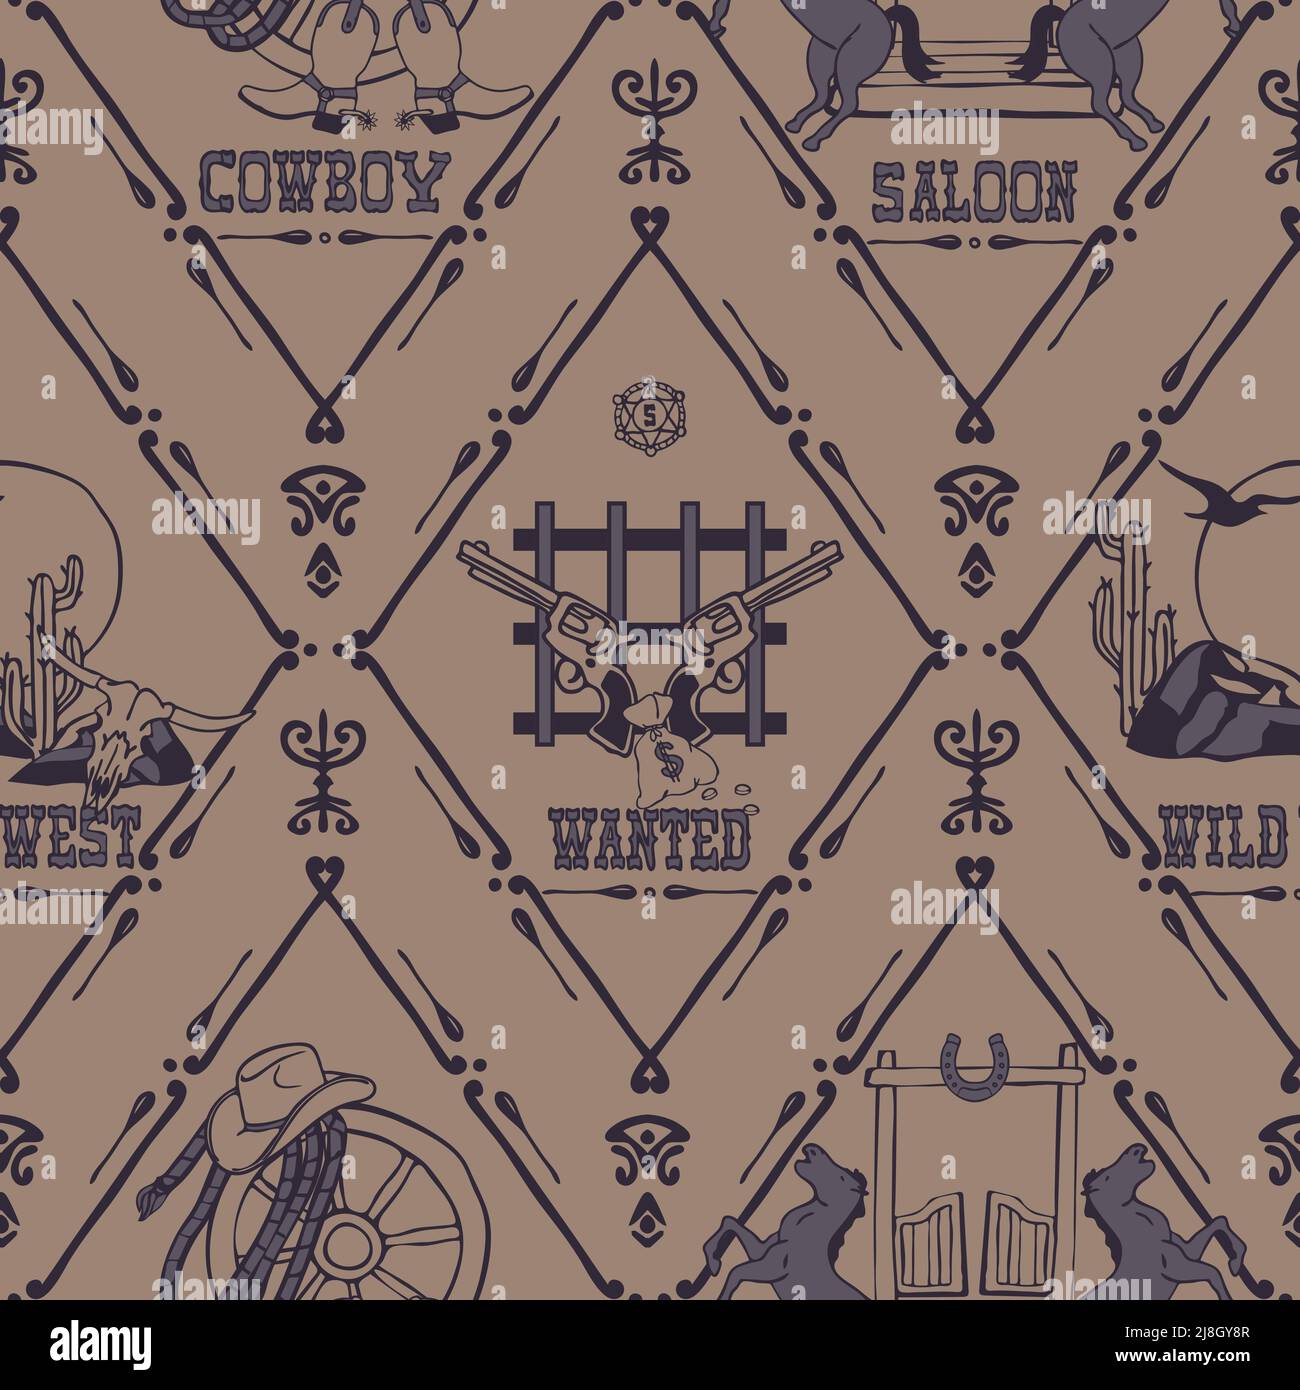 Seamless vector pattern with western style symbols on beige background. Vintage wild west wallpaper design. Decorative Texas fashion textile. Stock Vector